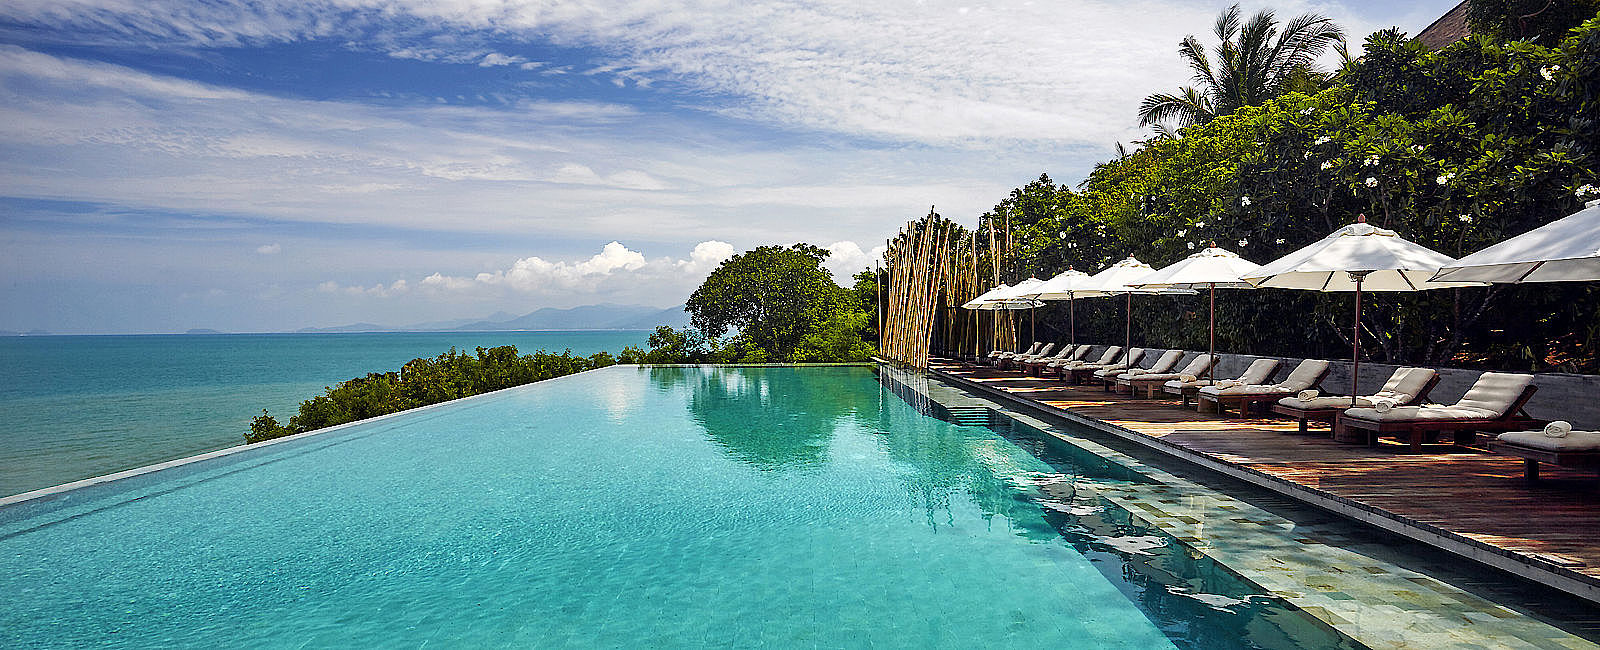 HOTEL ANGEBOTE
 Six Senses Samui: -25% Extended Stay Offer  
